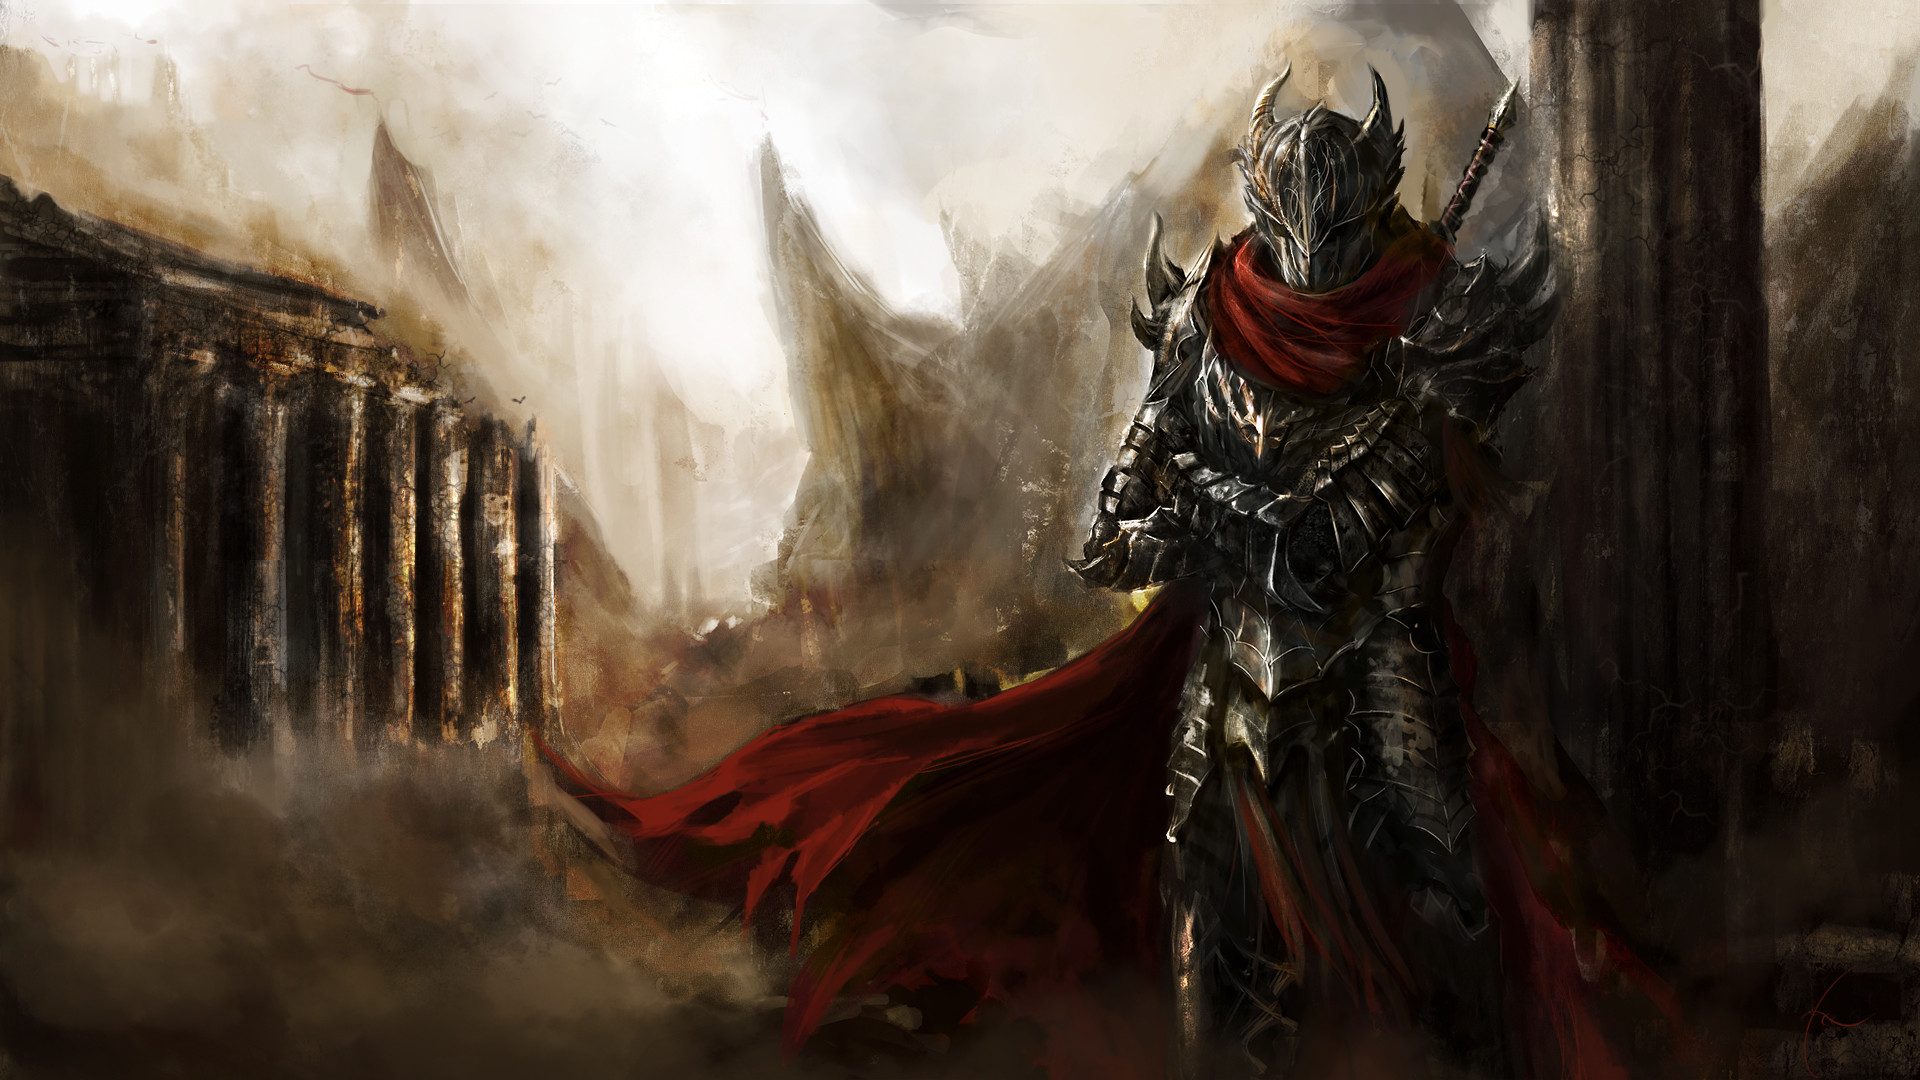 1920x1080 Warrior HD Wallpaper | Background Image |  | ID:440996 - Wallpaper  Abyss